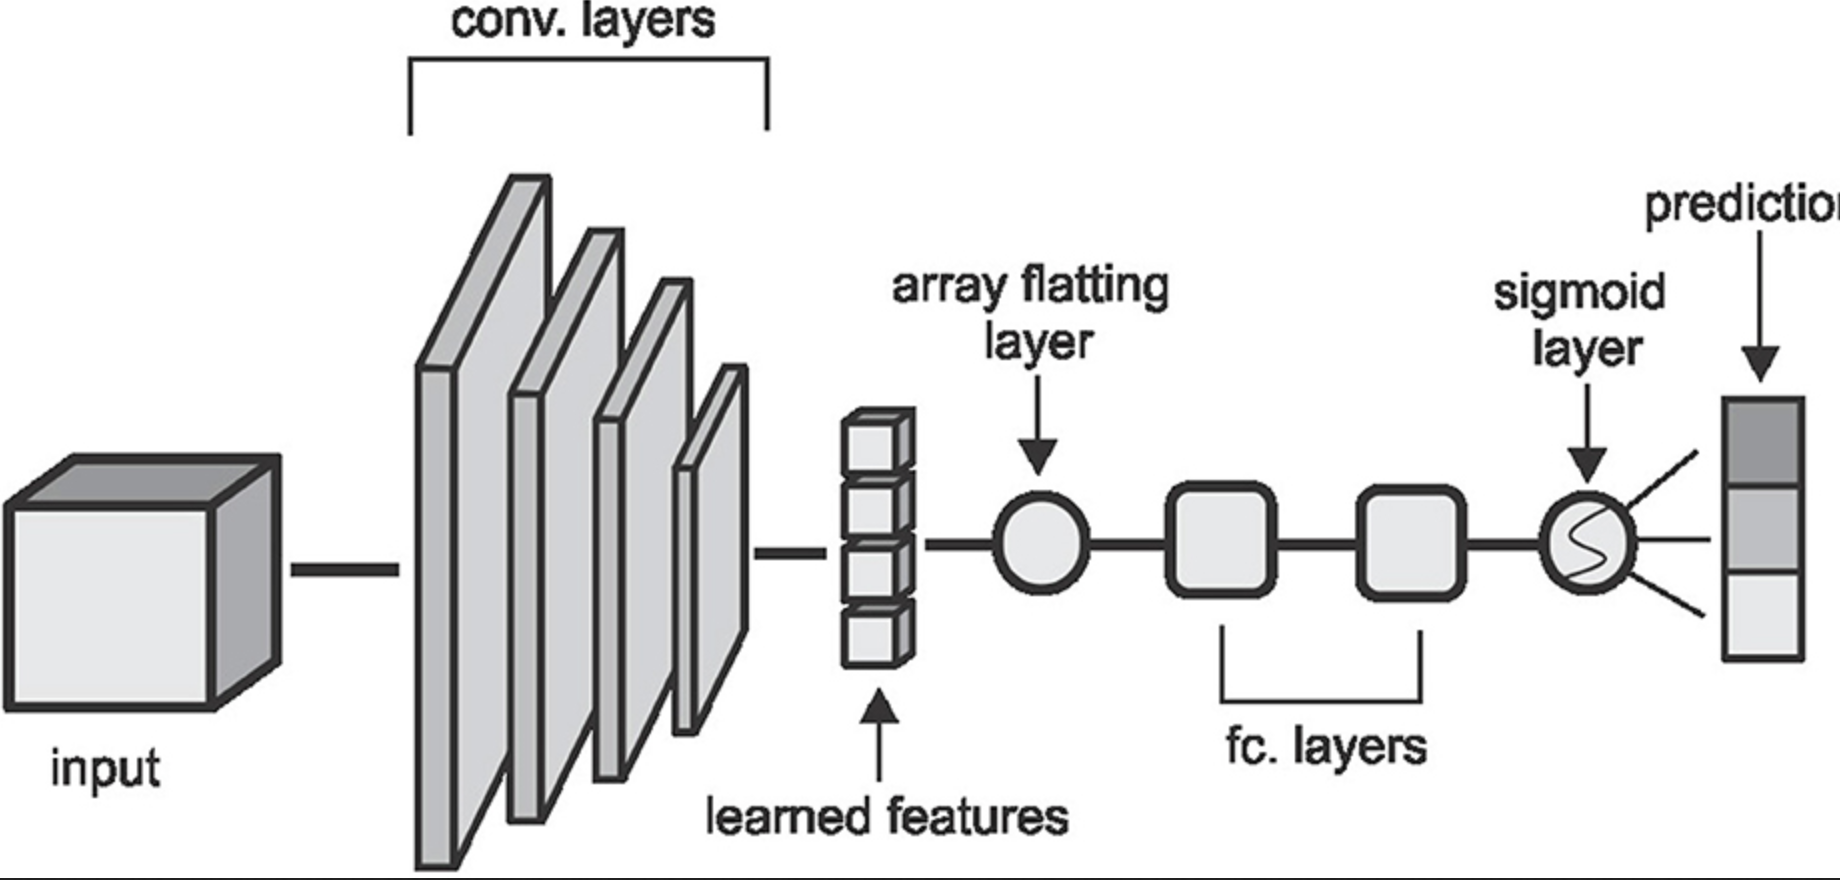 Figure 3 The CNN architecture used in the classification task.